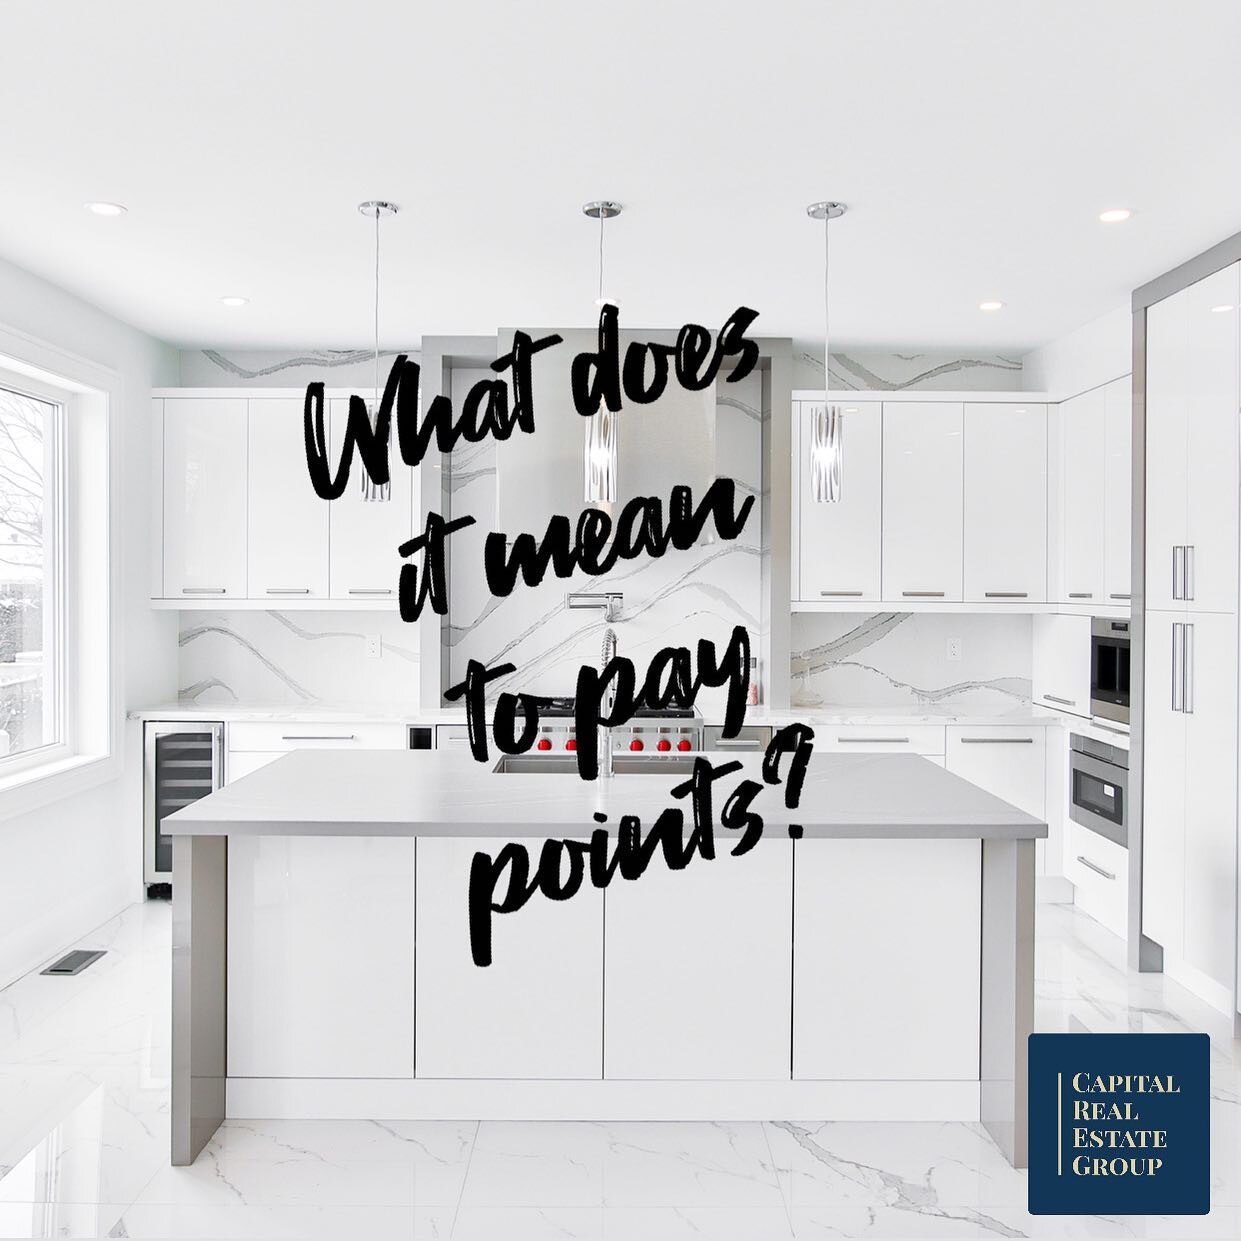 Did you know &hellip;

Paying points when you purchase your loan is essentially buying down the interest rate you will pay. You pay more upfront in exchange for a lower interest rate over the life of your loan. A point is equal to 1% of the mortgage 